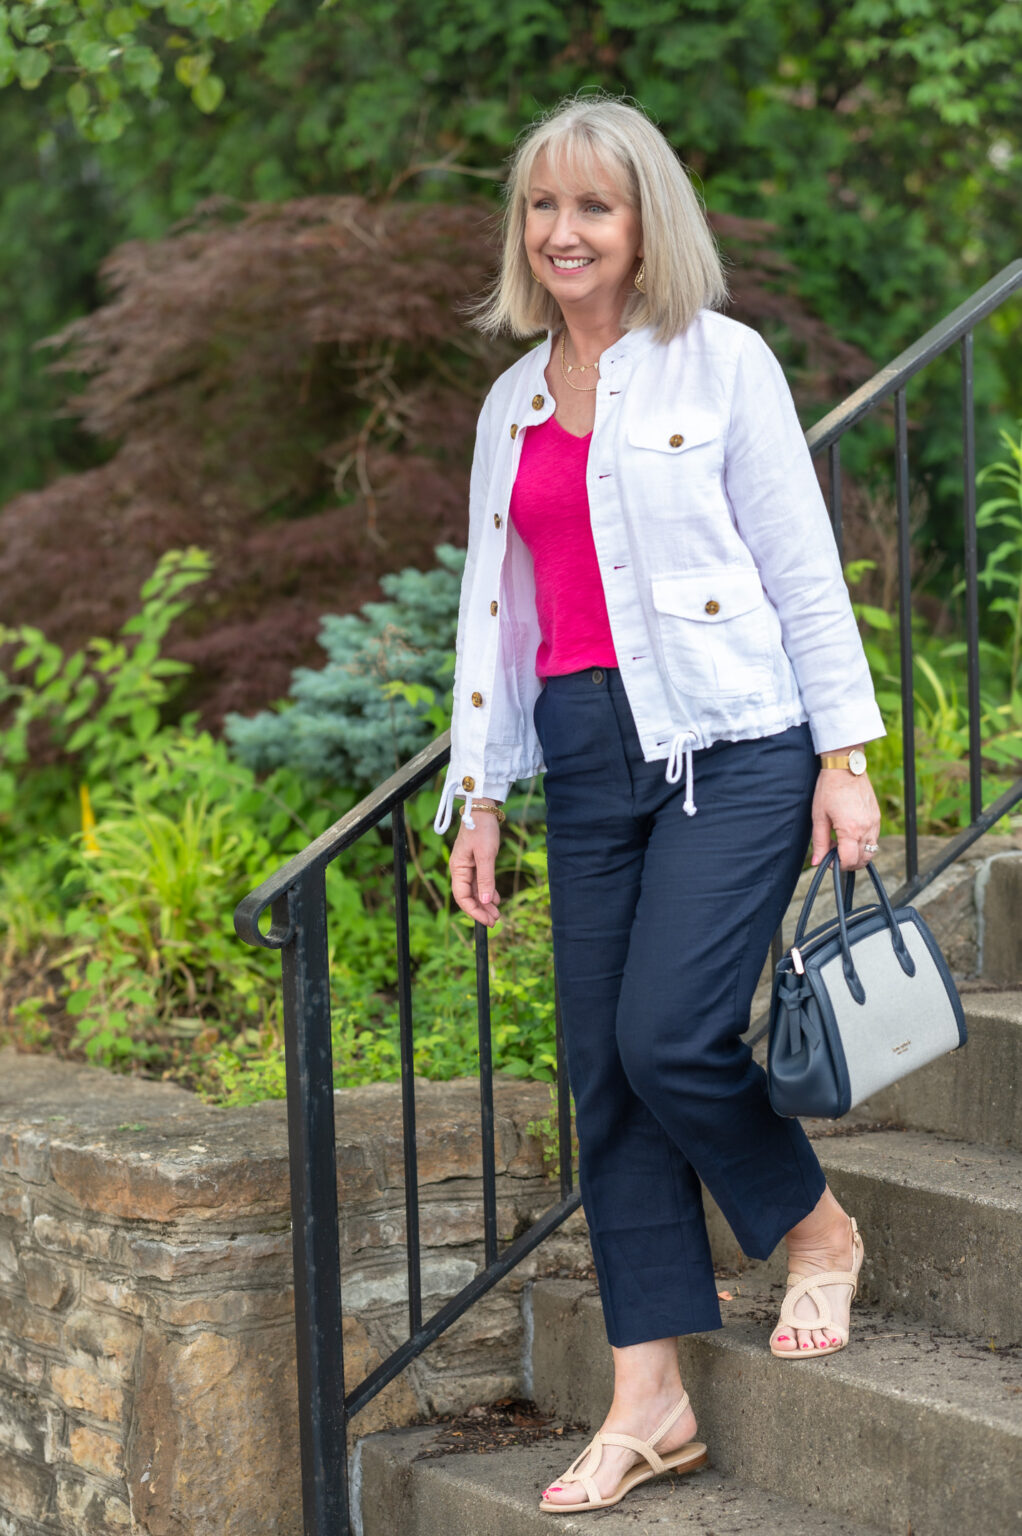 How to Layer On a Little Style Even in Summer - Dressed for My Day